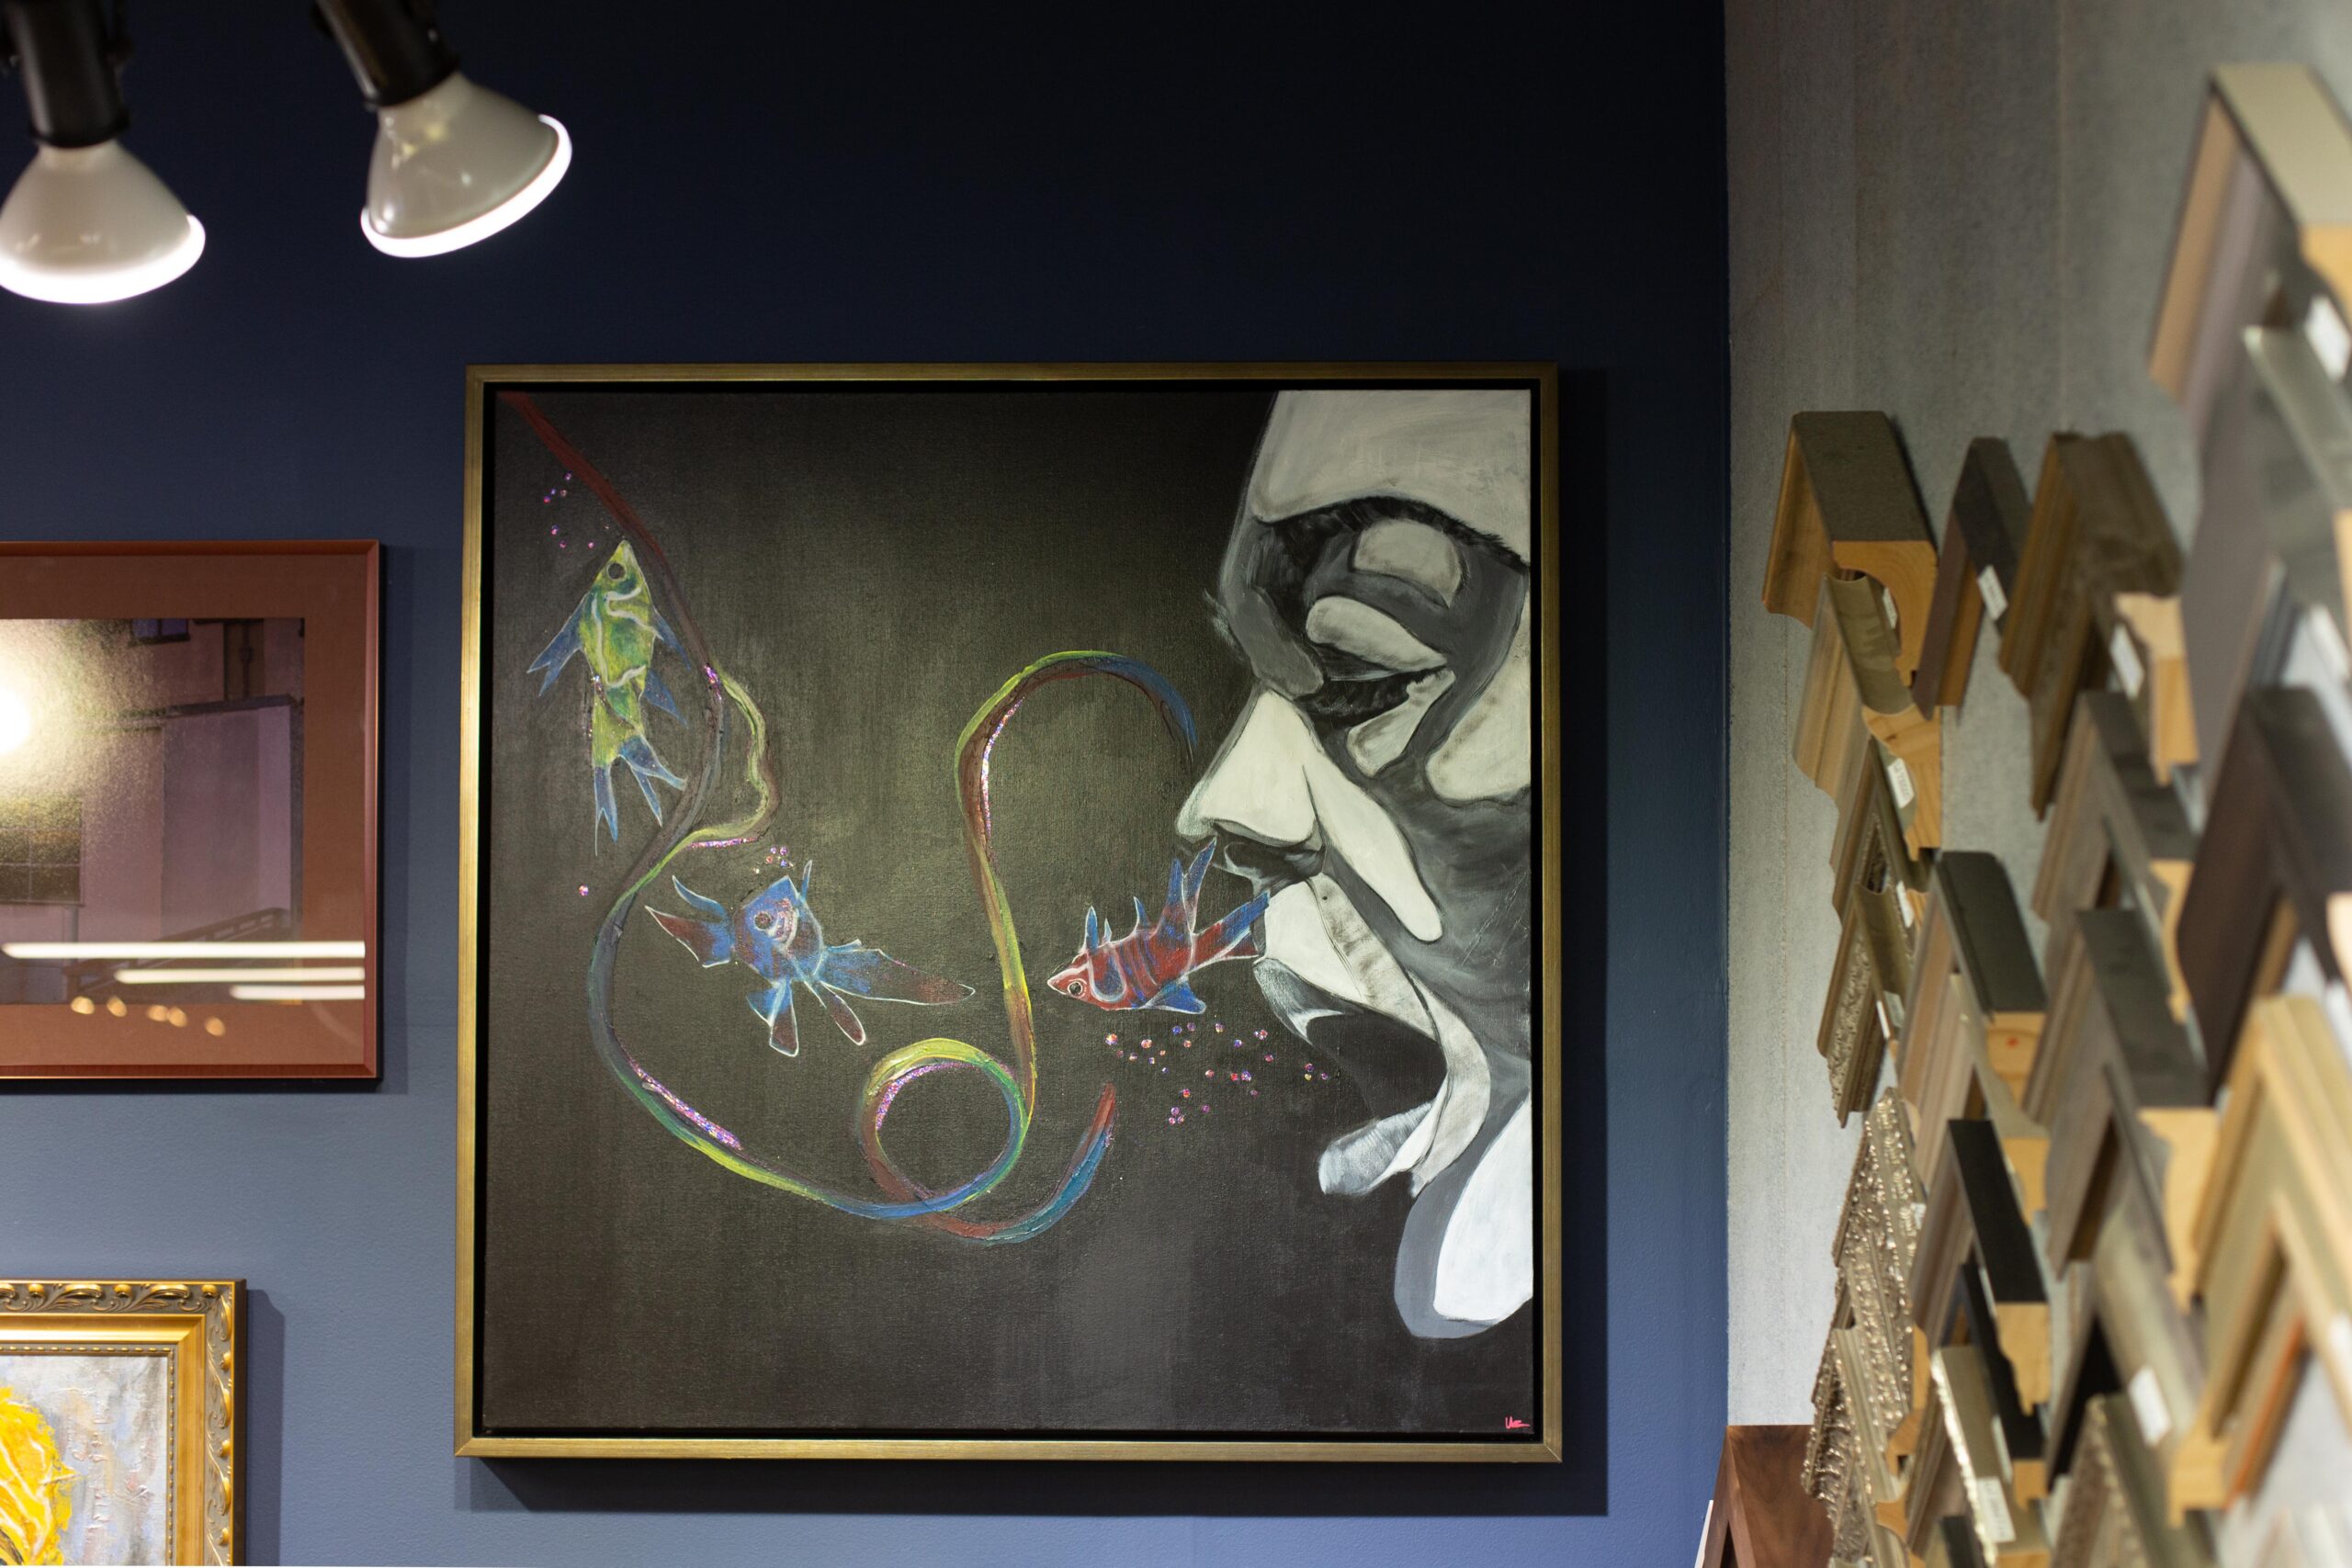 A large square art piece hangs on the wall of the in-house Peterson Picture Co. gallery. The art shows the profile of a face with fish swimming around.